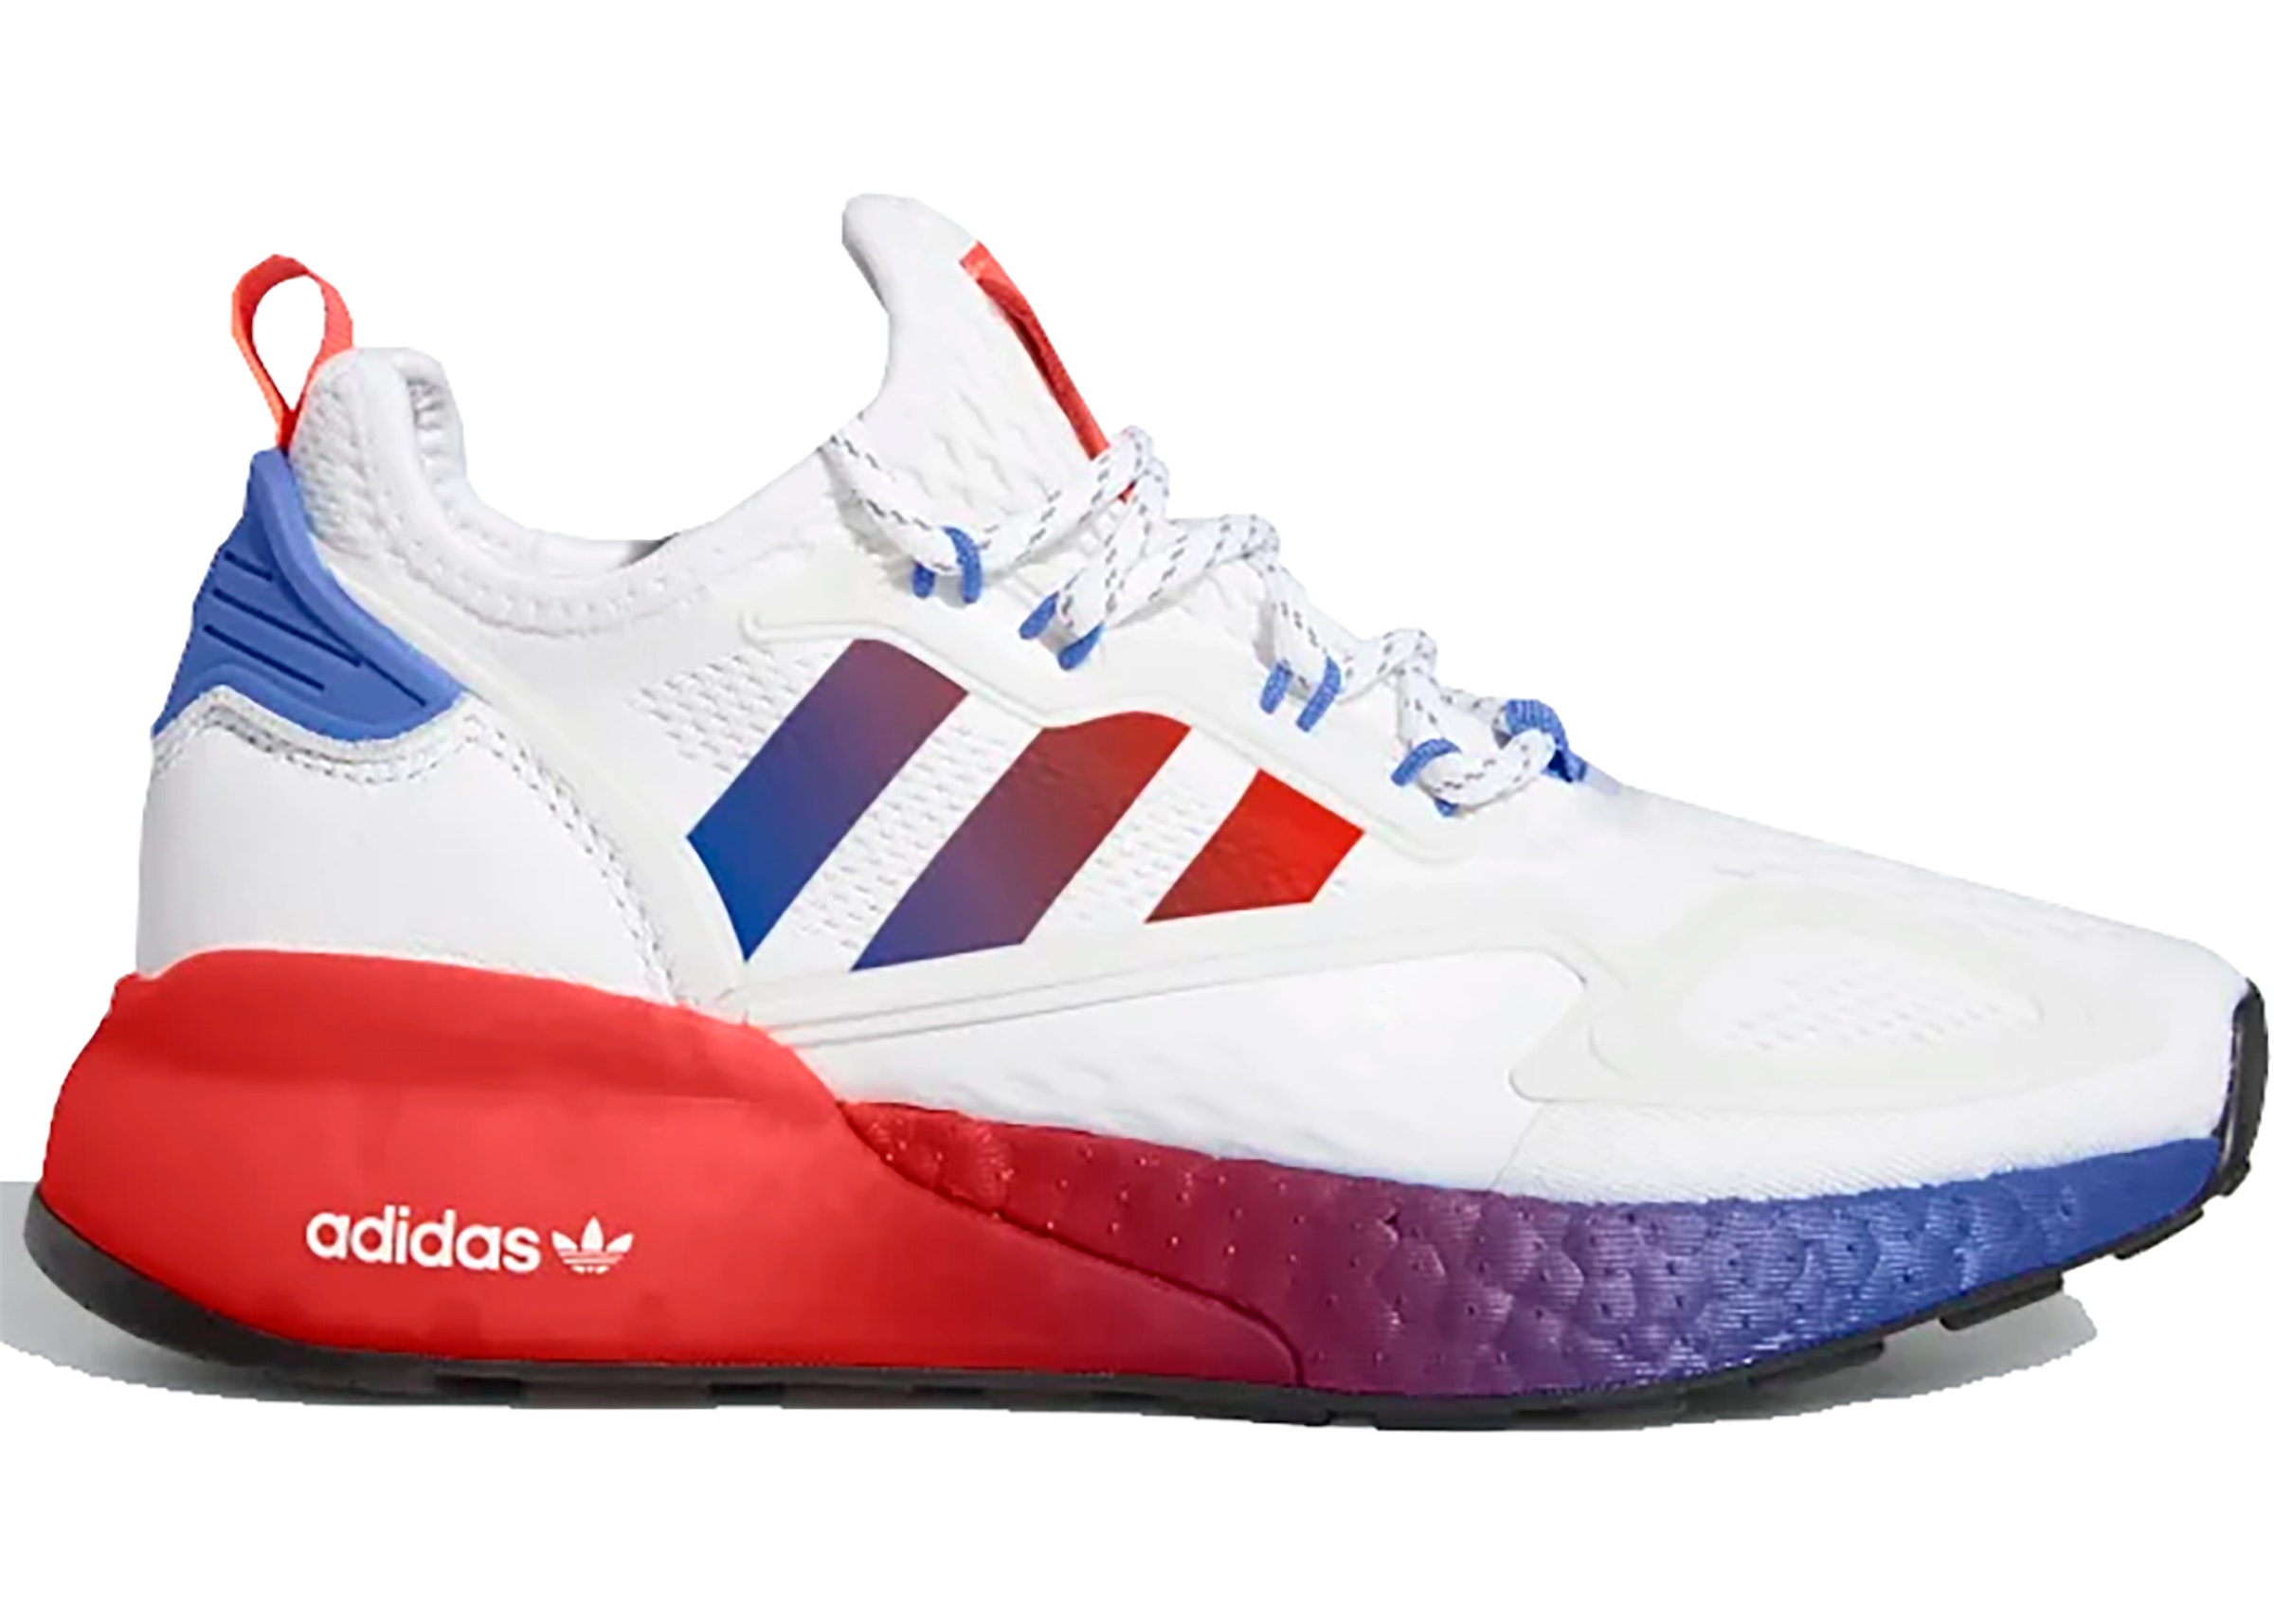 adidas ZX 2K Boost White Solar Red Blue (GS)